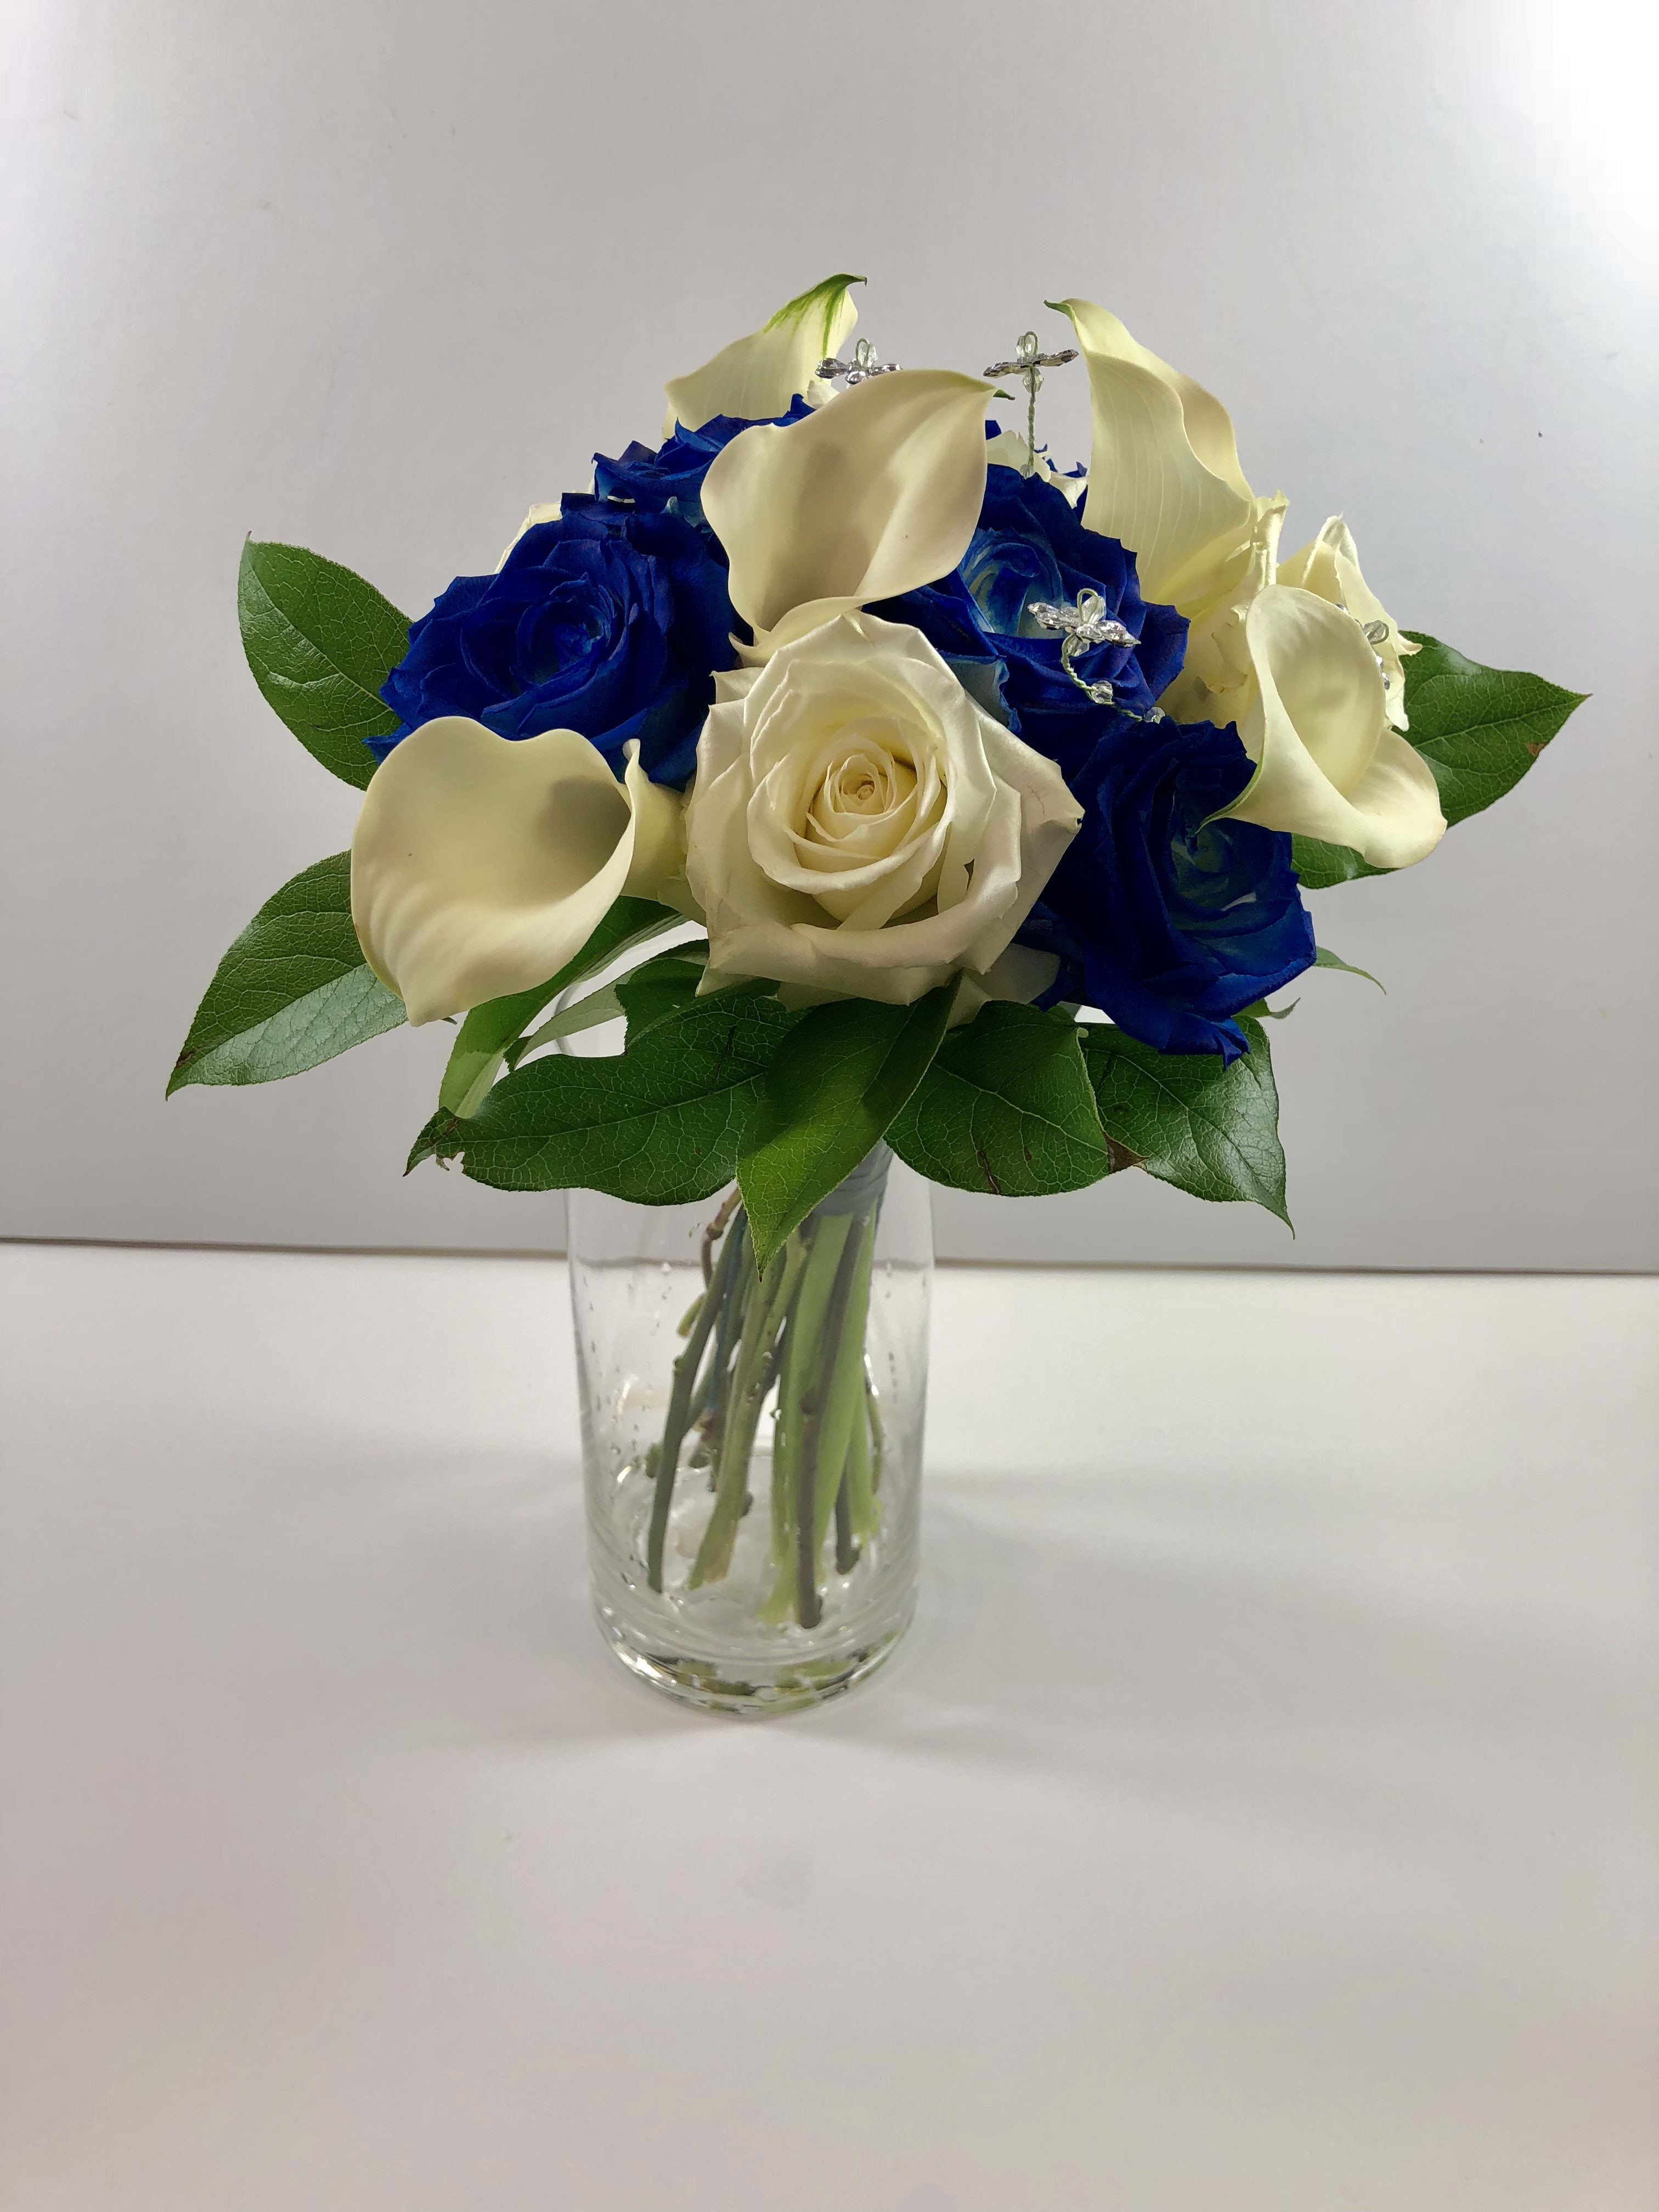 C12 Prom Clutch with Roses and Cala Lilies  - Clutch with Roses and Cala Lilies.  This design has some roses sprayed to match a royal blue dress.    Each design is customized for your date and her beautiful dress.